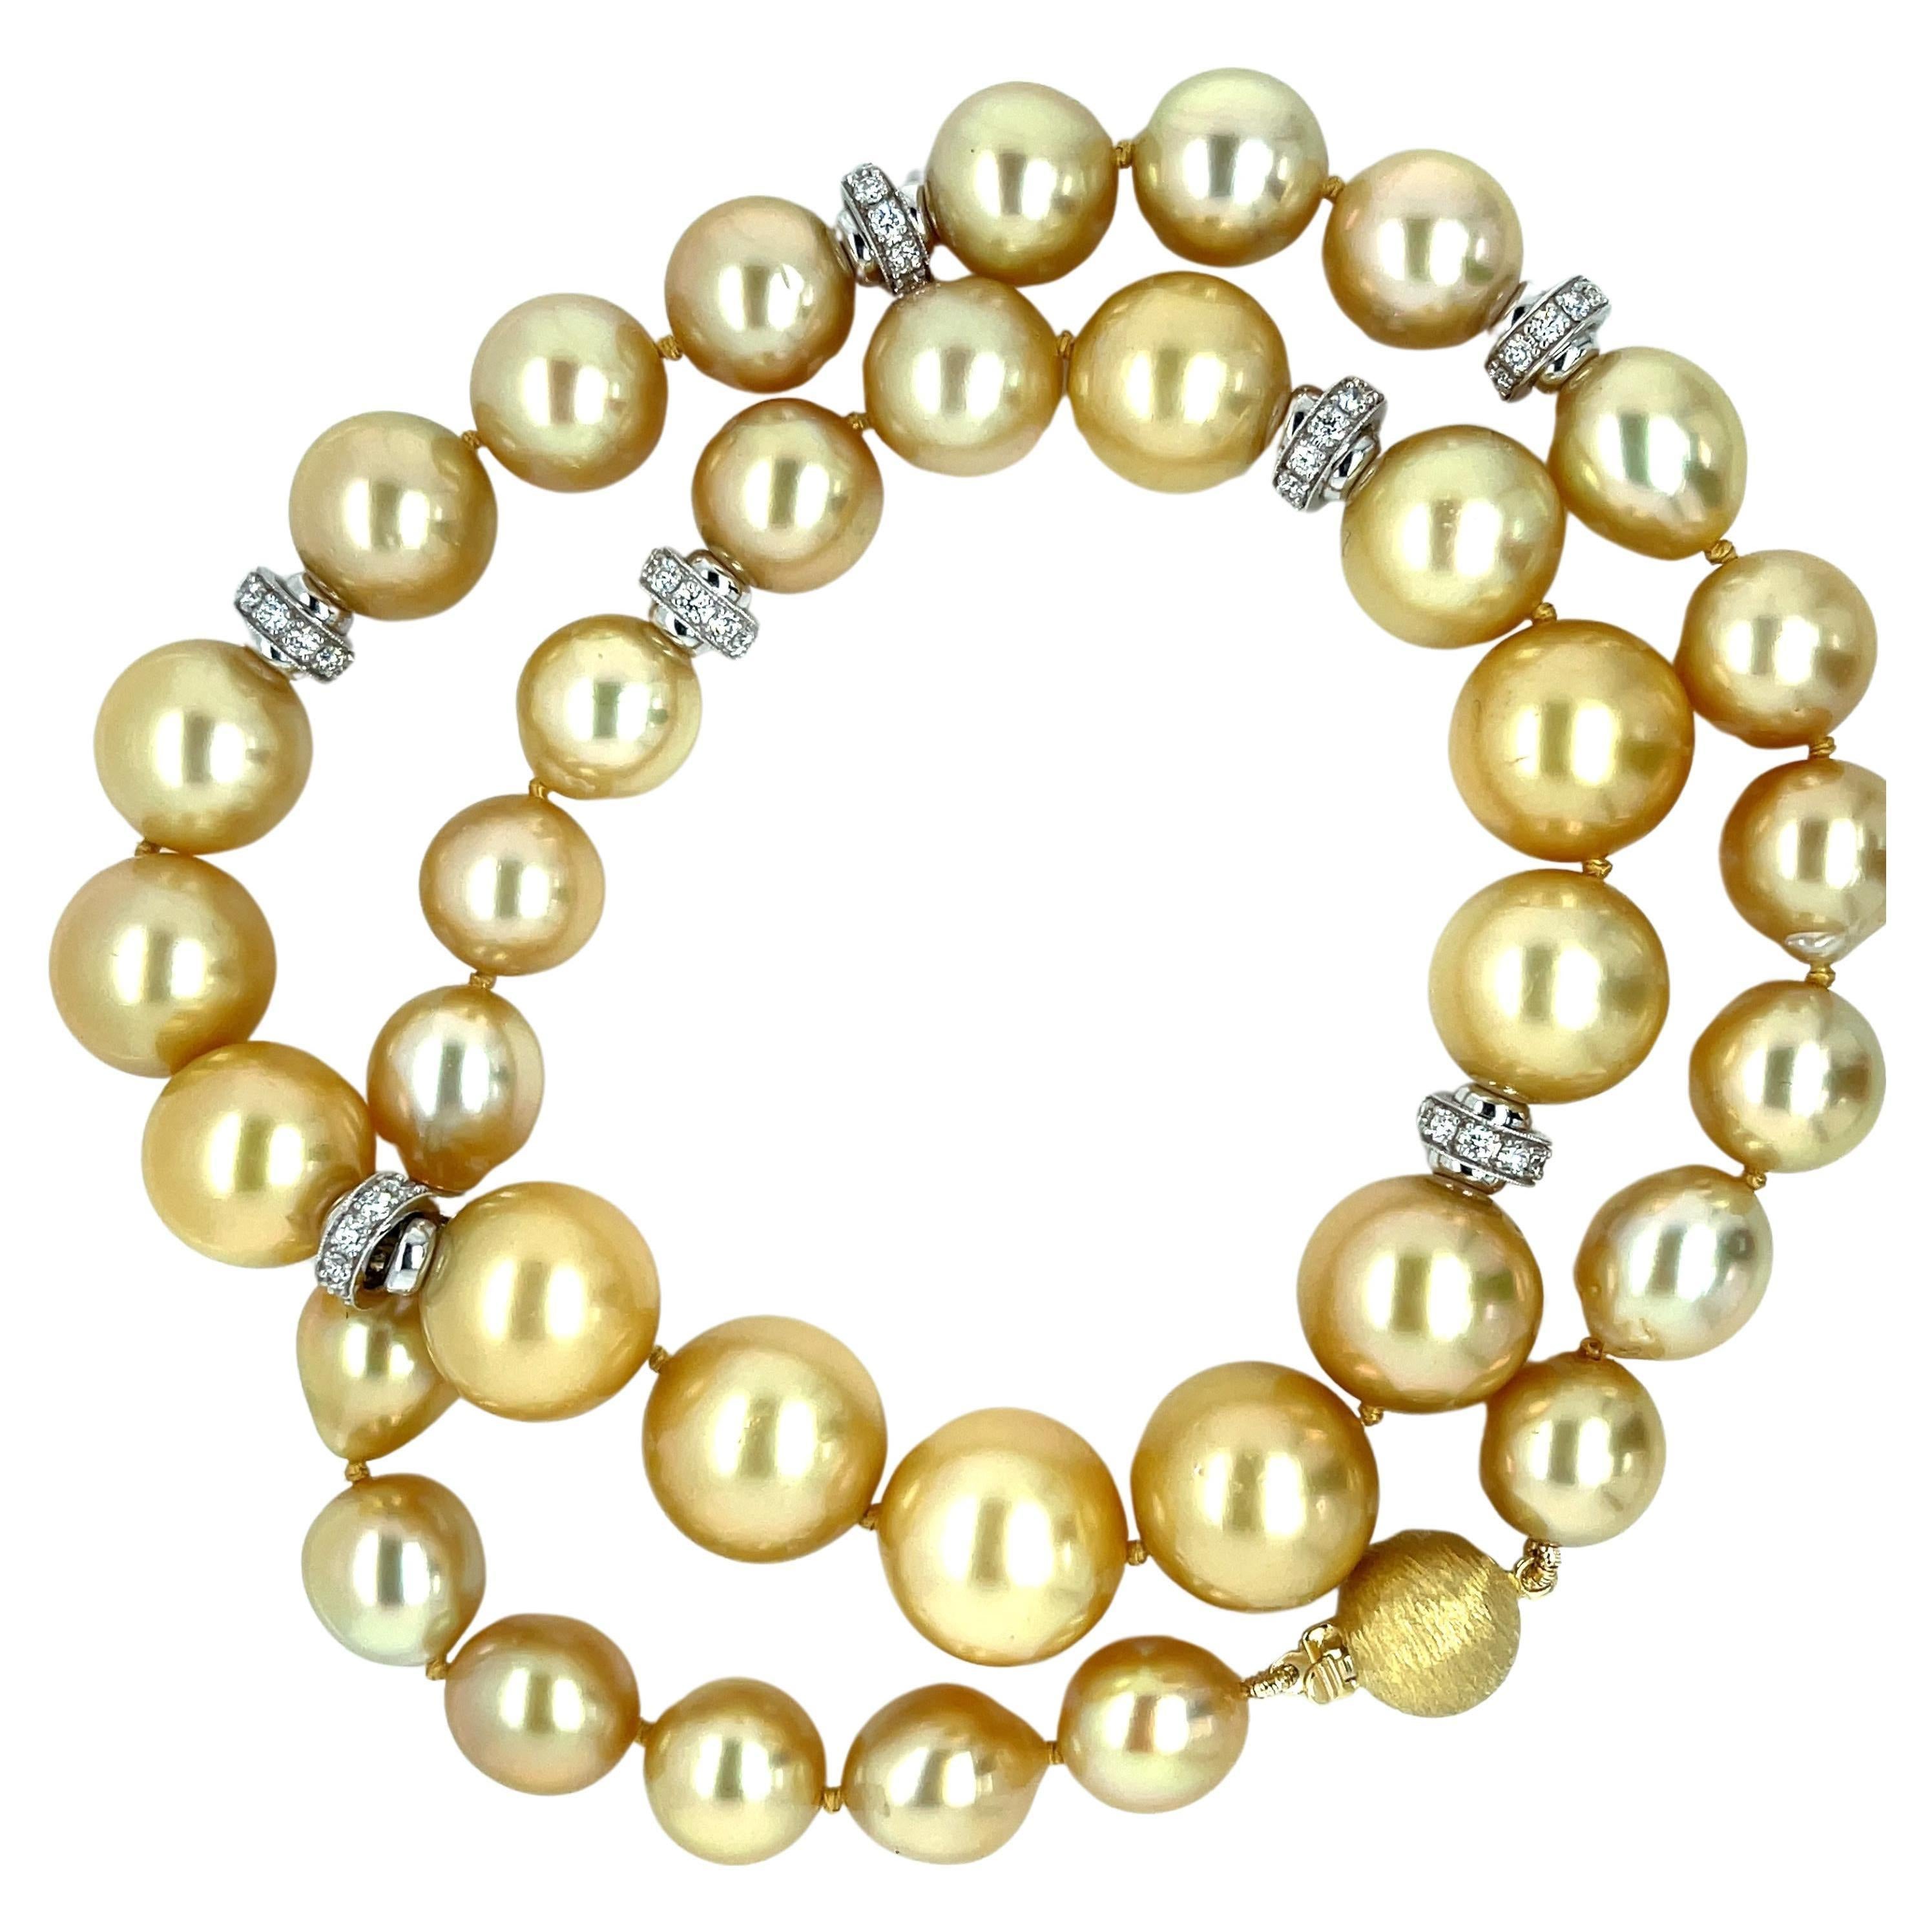 Golden South Sea Pearl Necklace, 18 Inches with 14k and 18k Accents, 9.6 - 13mm For Sale